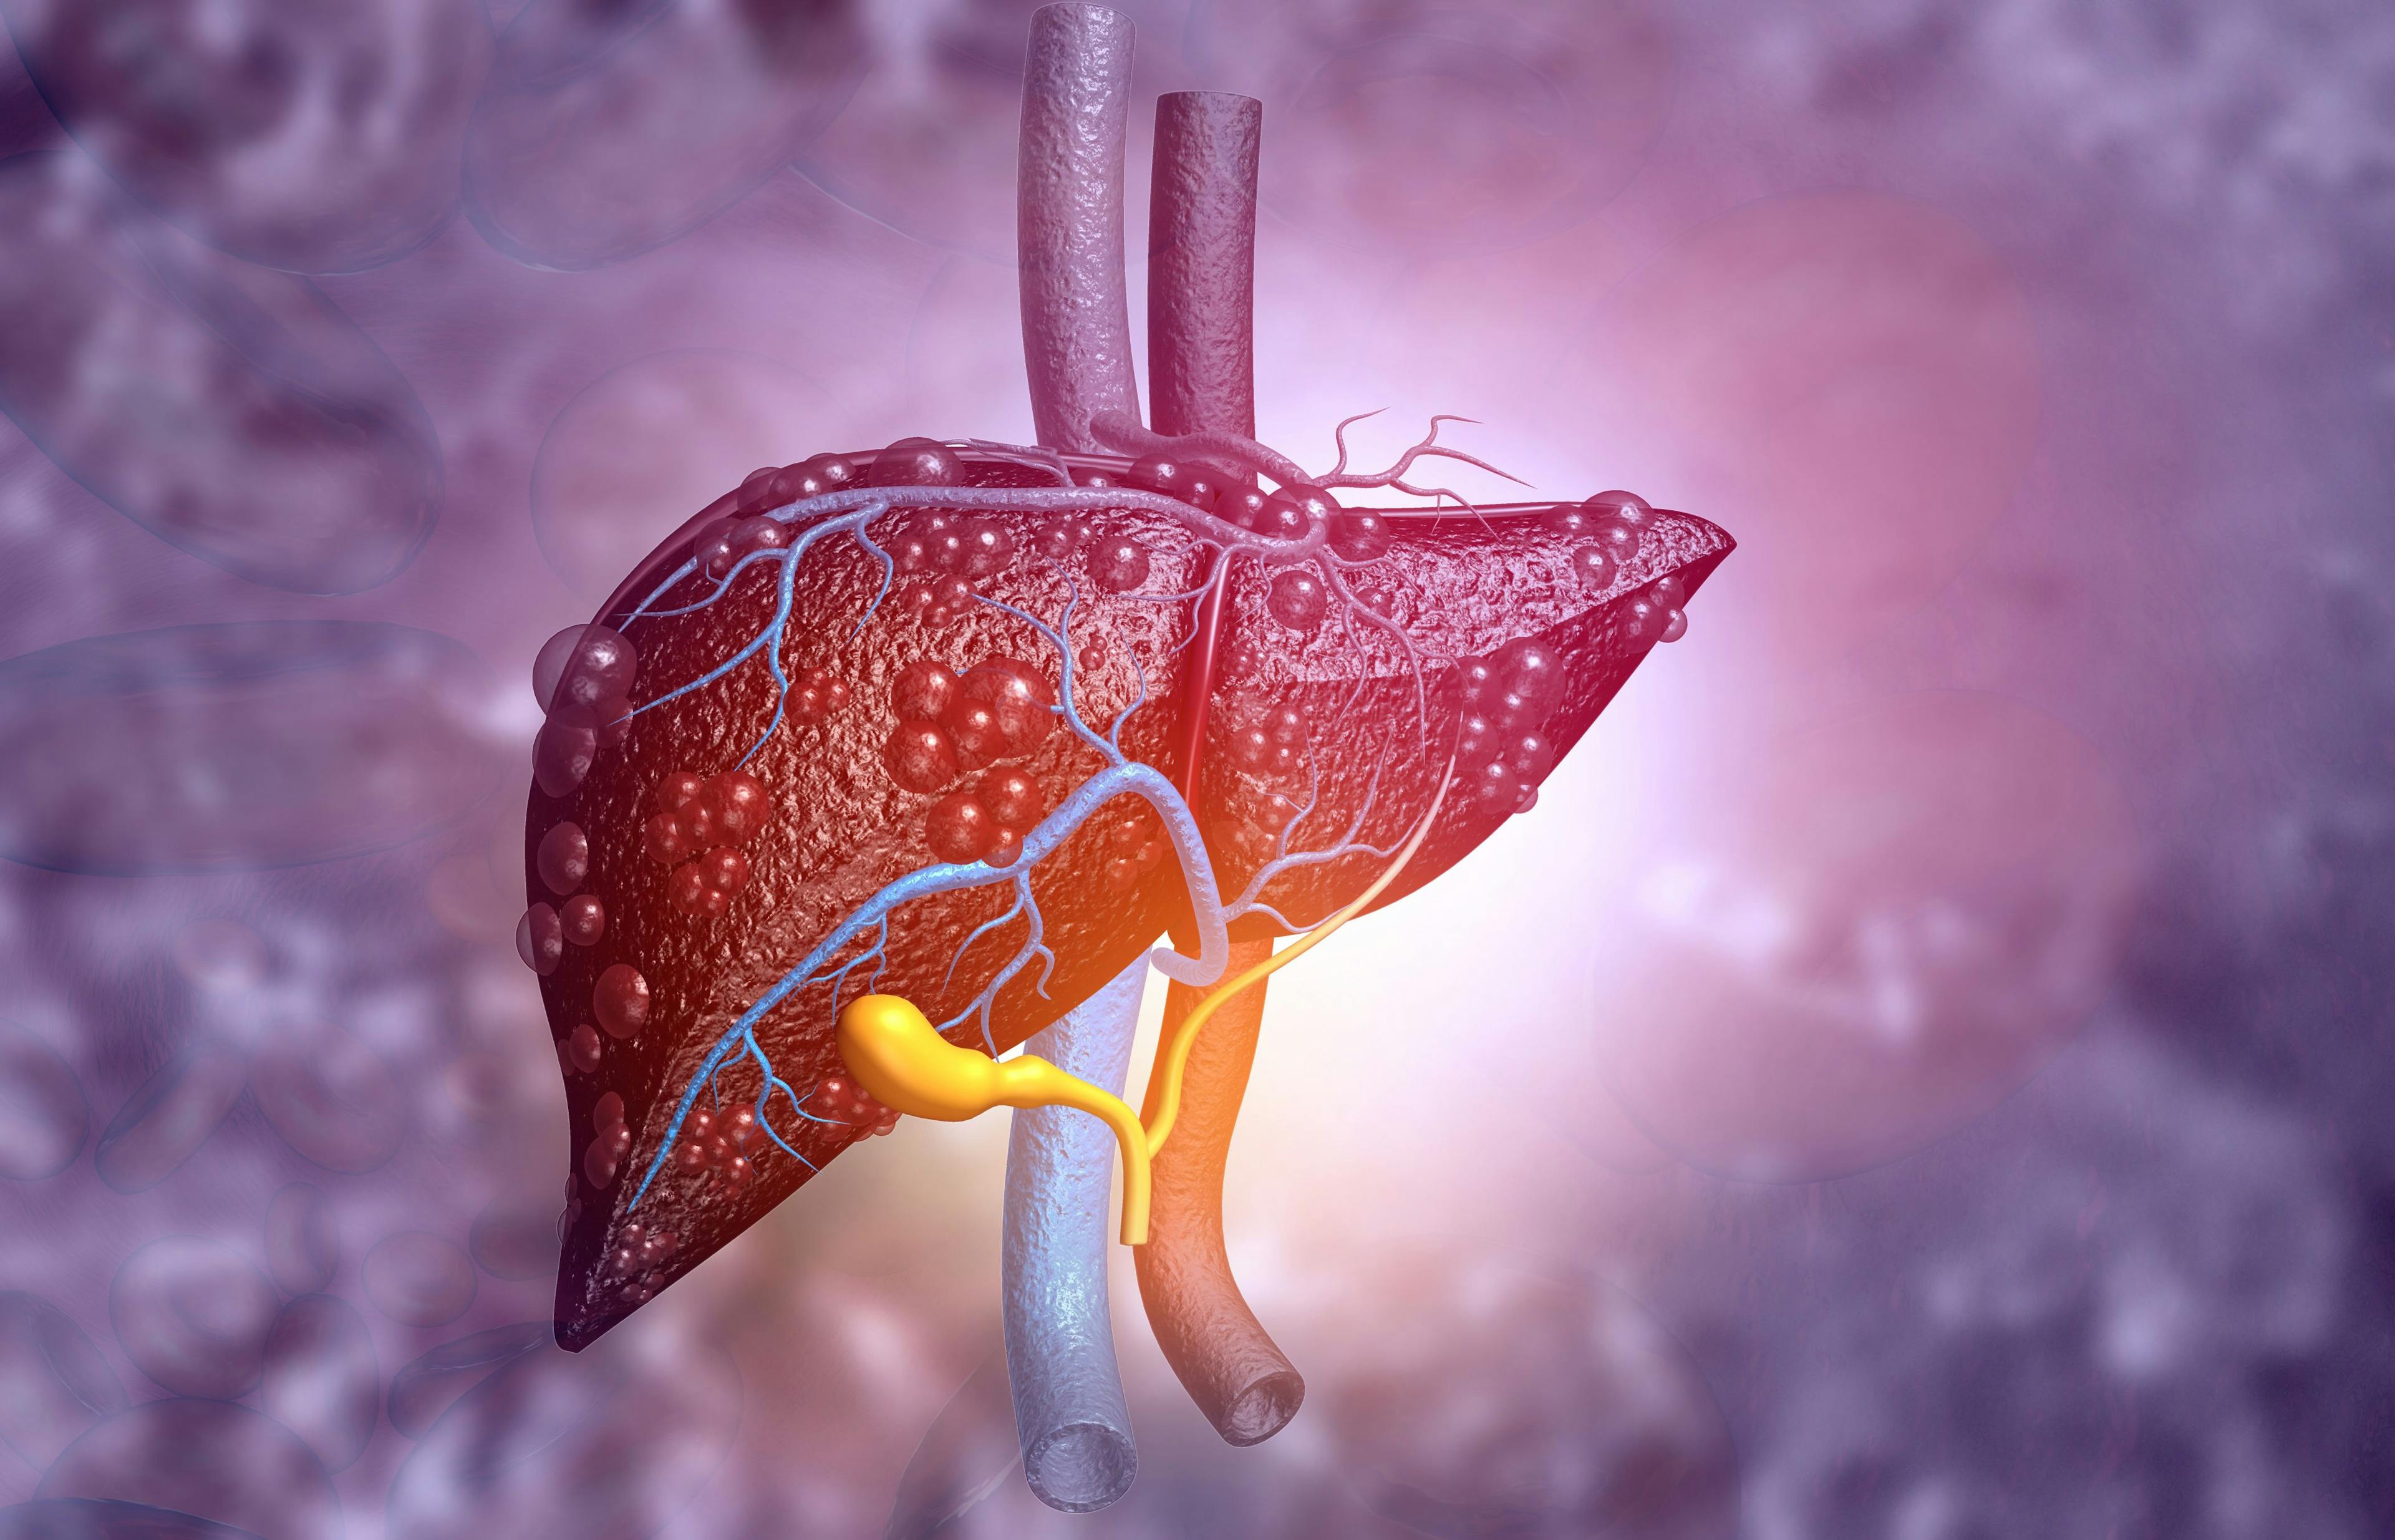 Alcohol’s Role in Liver Disease Deaths During COVID-19